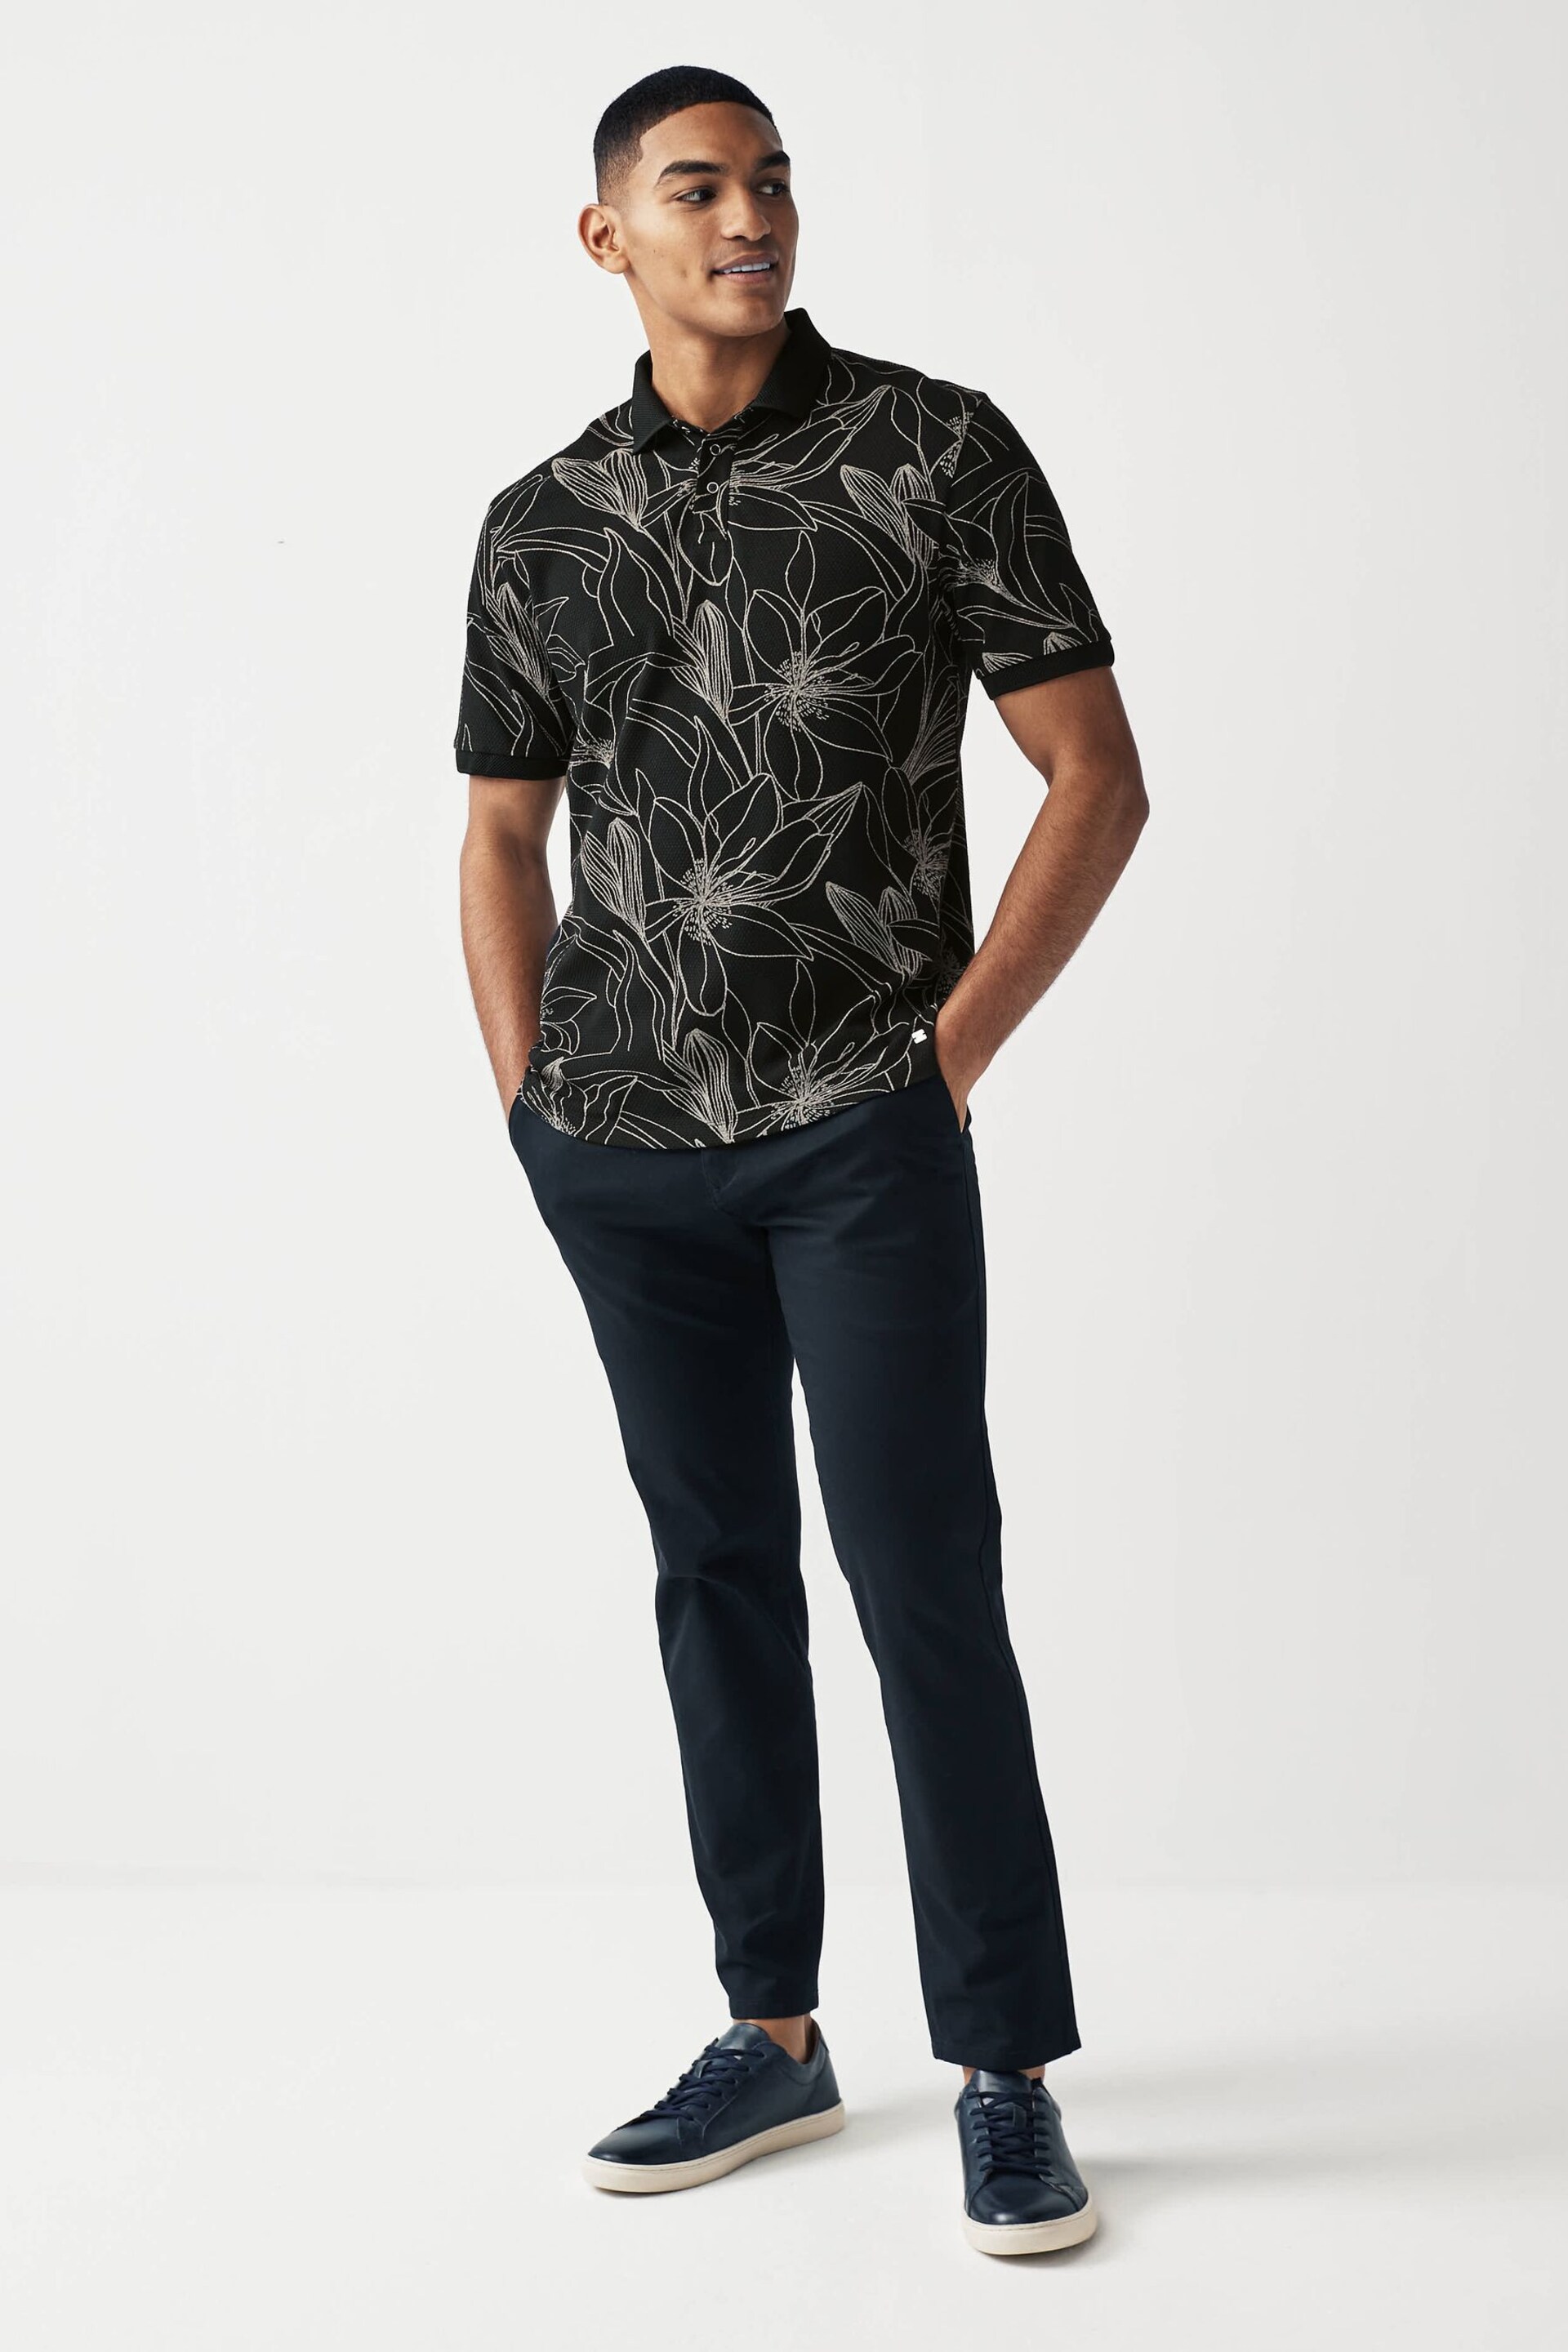 Black/White Floral Print Textured Polo Shirt - Image 4 of 8